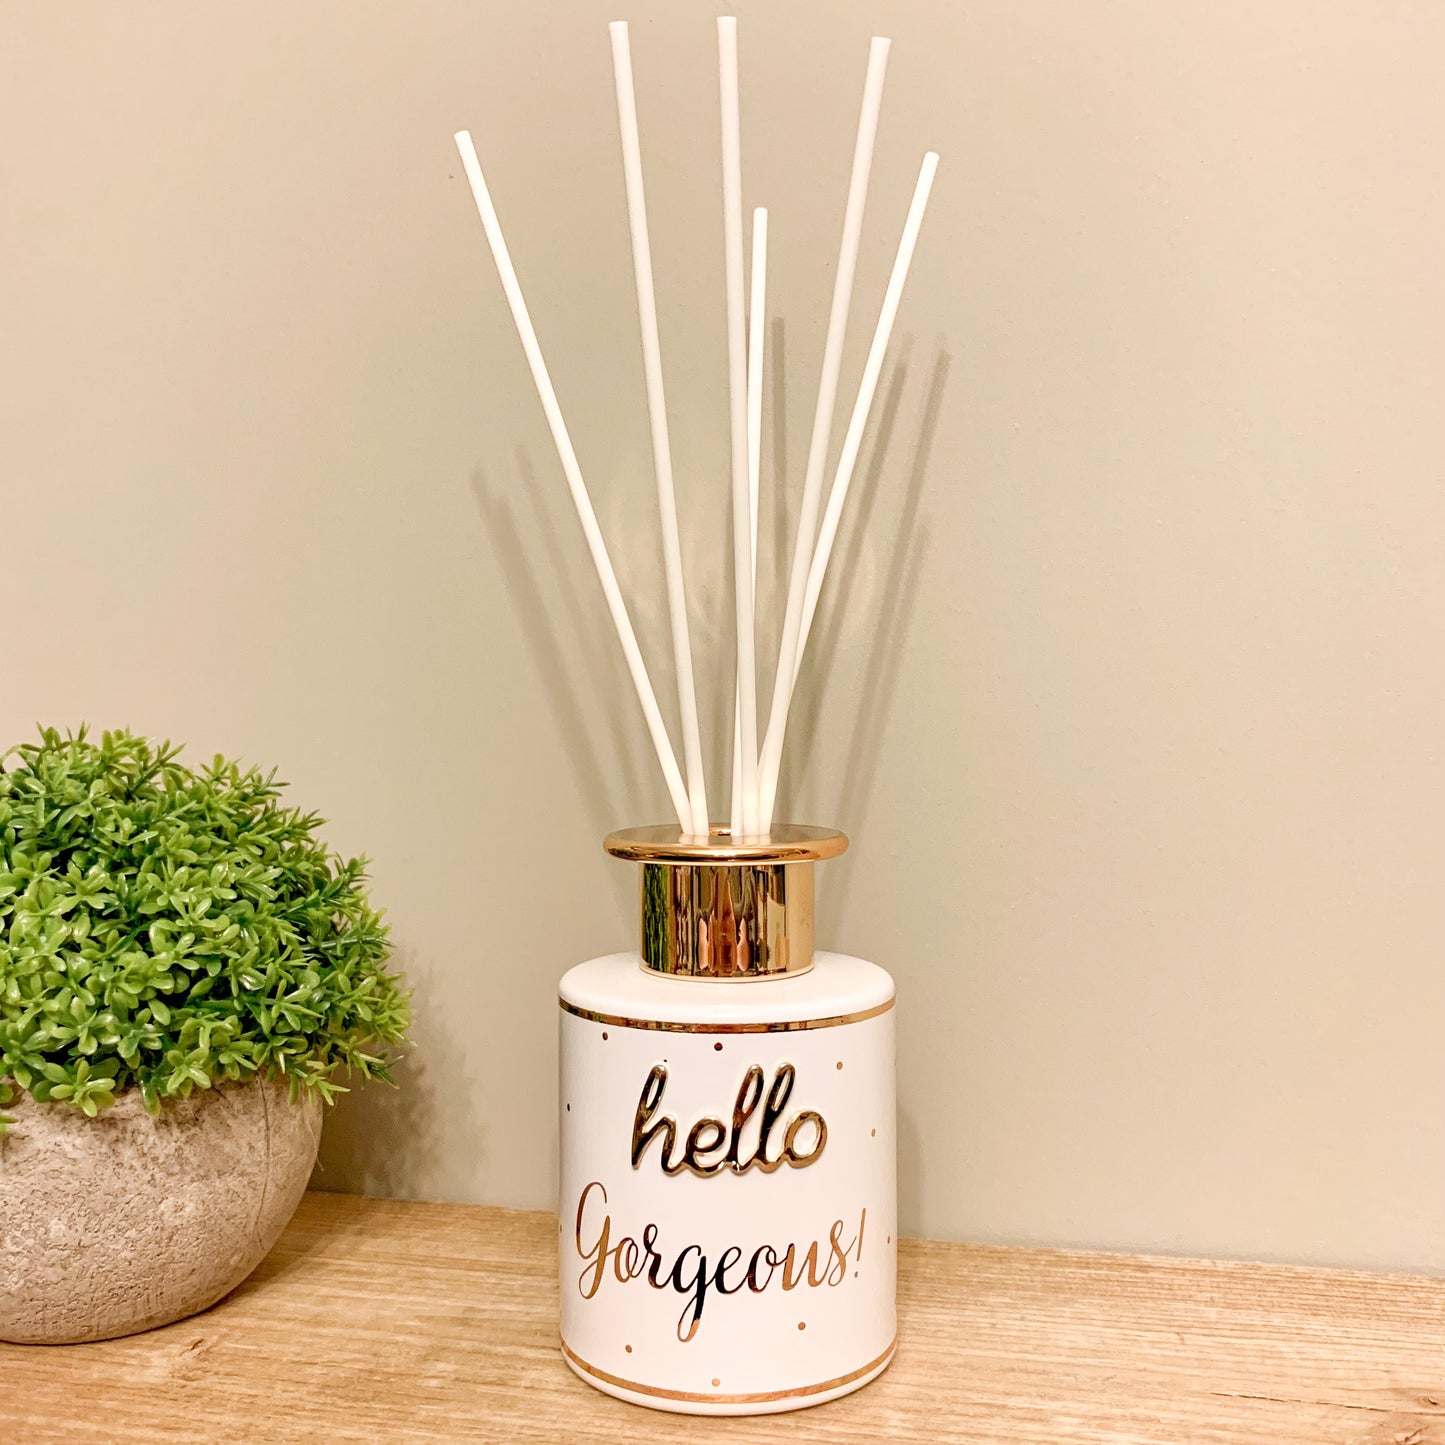 Hello Gorgeous boutique reed diffuser